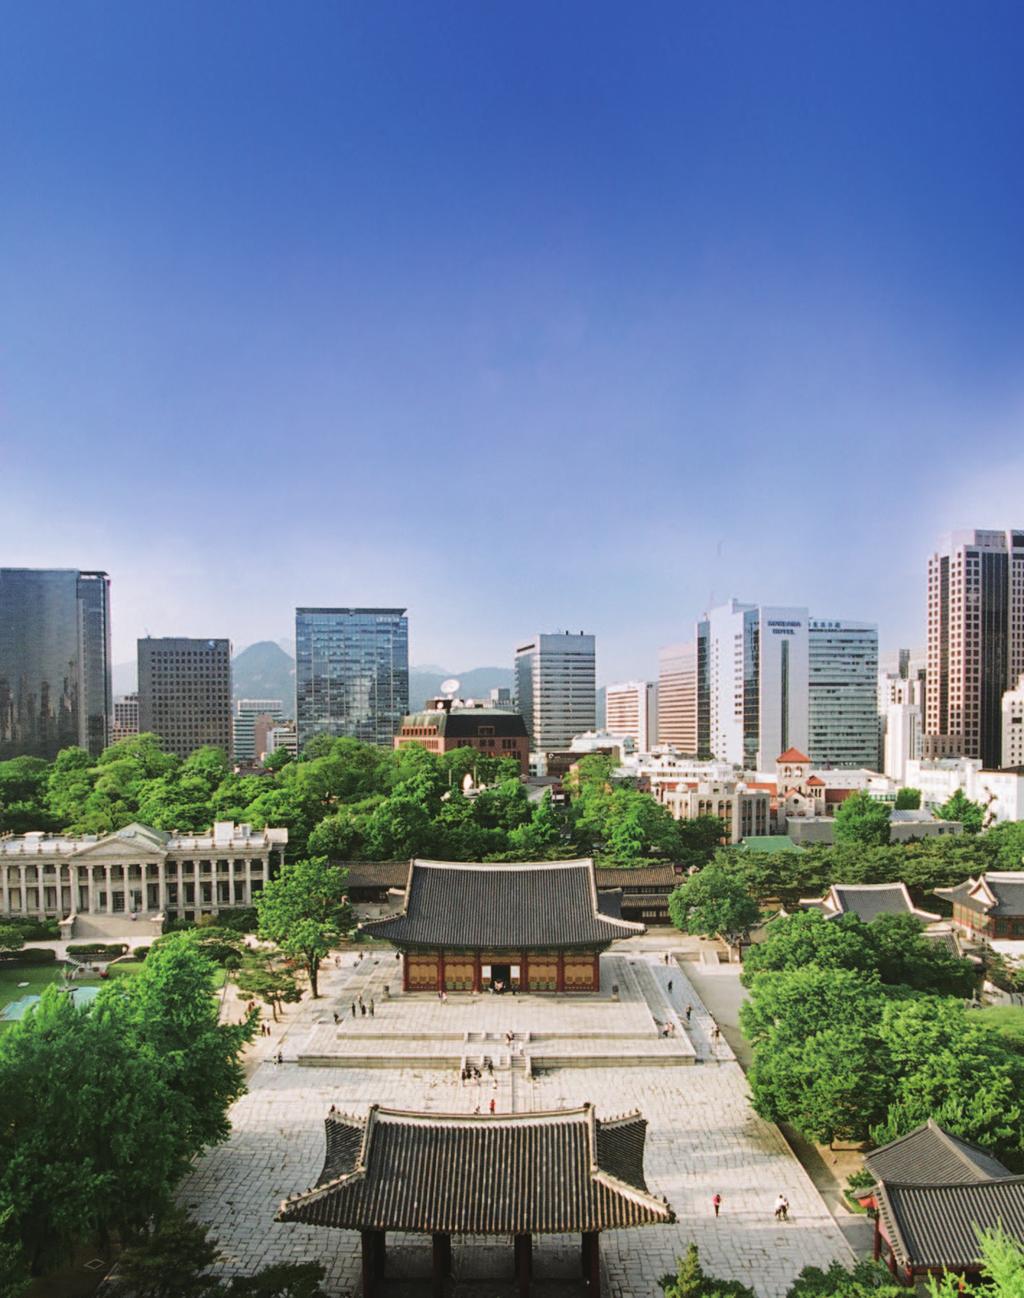 Seoul Tourism Organization (STO) is a joint venture launched by the city and private enterprises in February 2008 to promote Seoul as a convention and tourism destination.